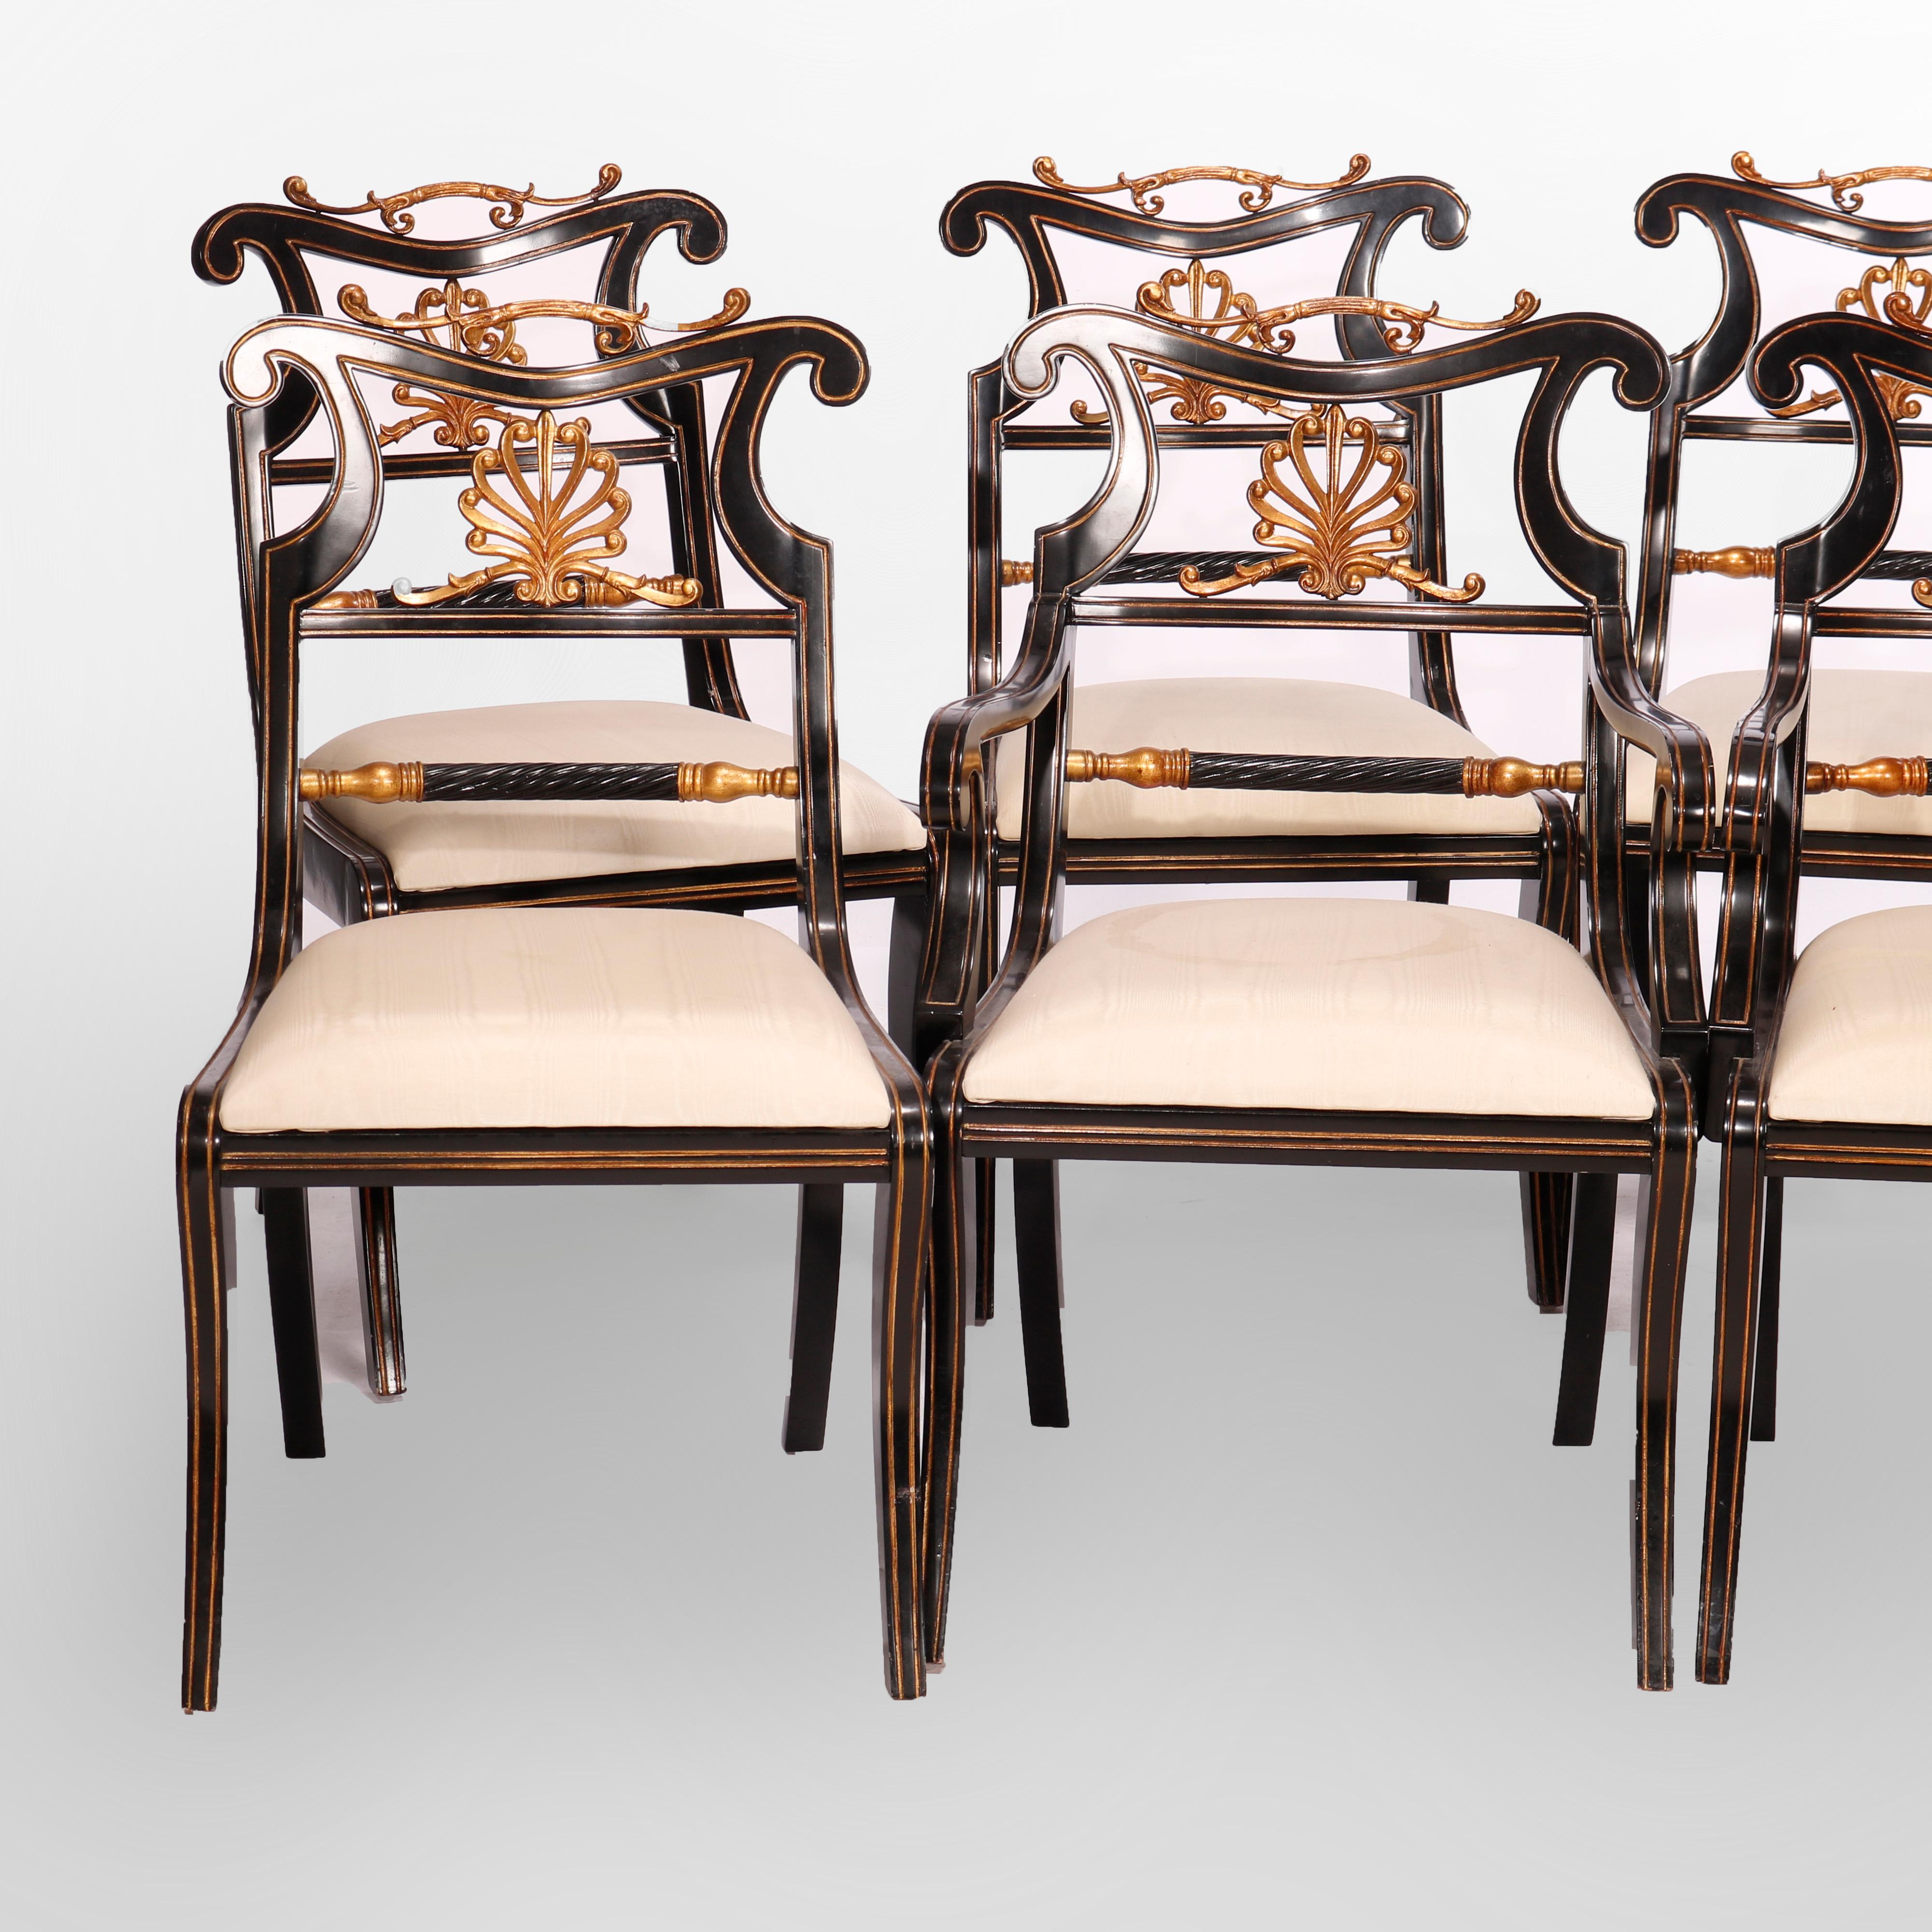 Six Maitland Smith French Empire Style Ebonized & Giltwood Dining Chairs 20th C 5